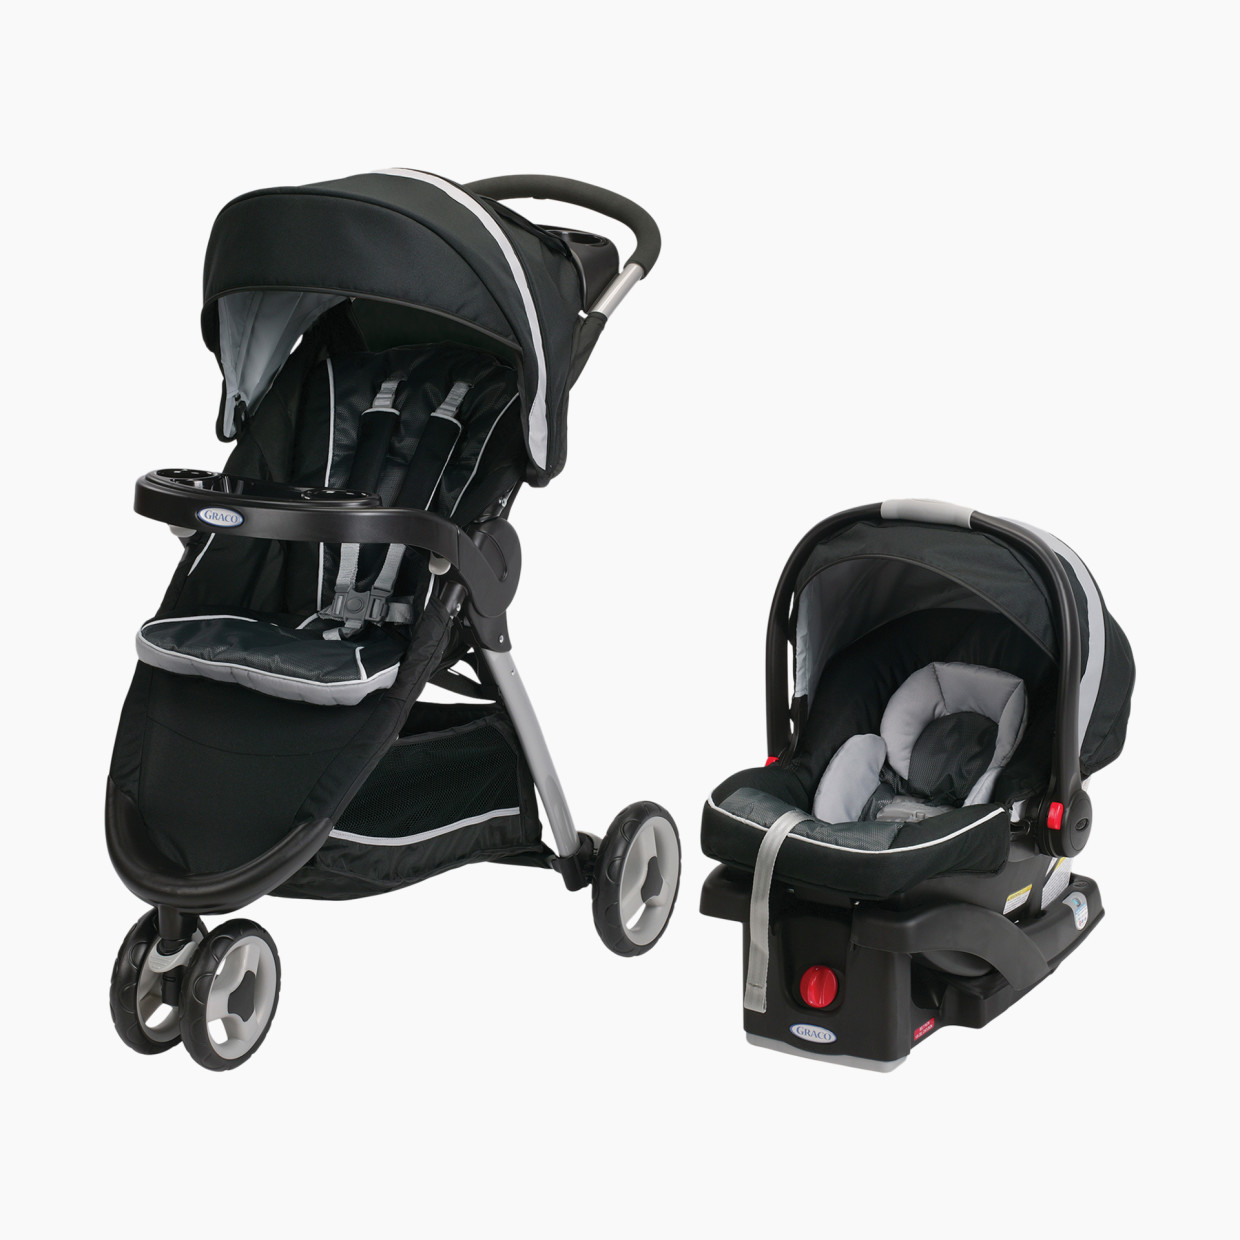 Graco FastAction Fold Sport Click Connect Travel System - Gotham.